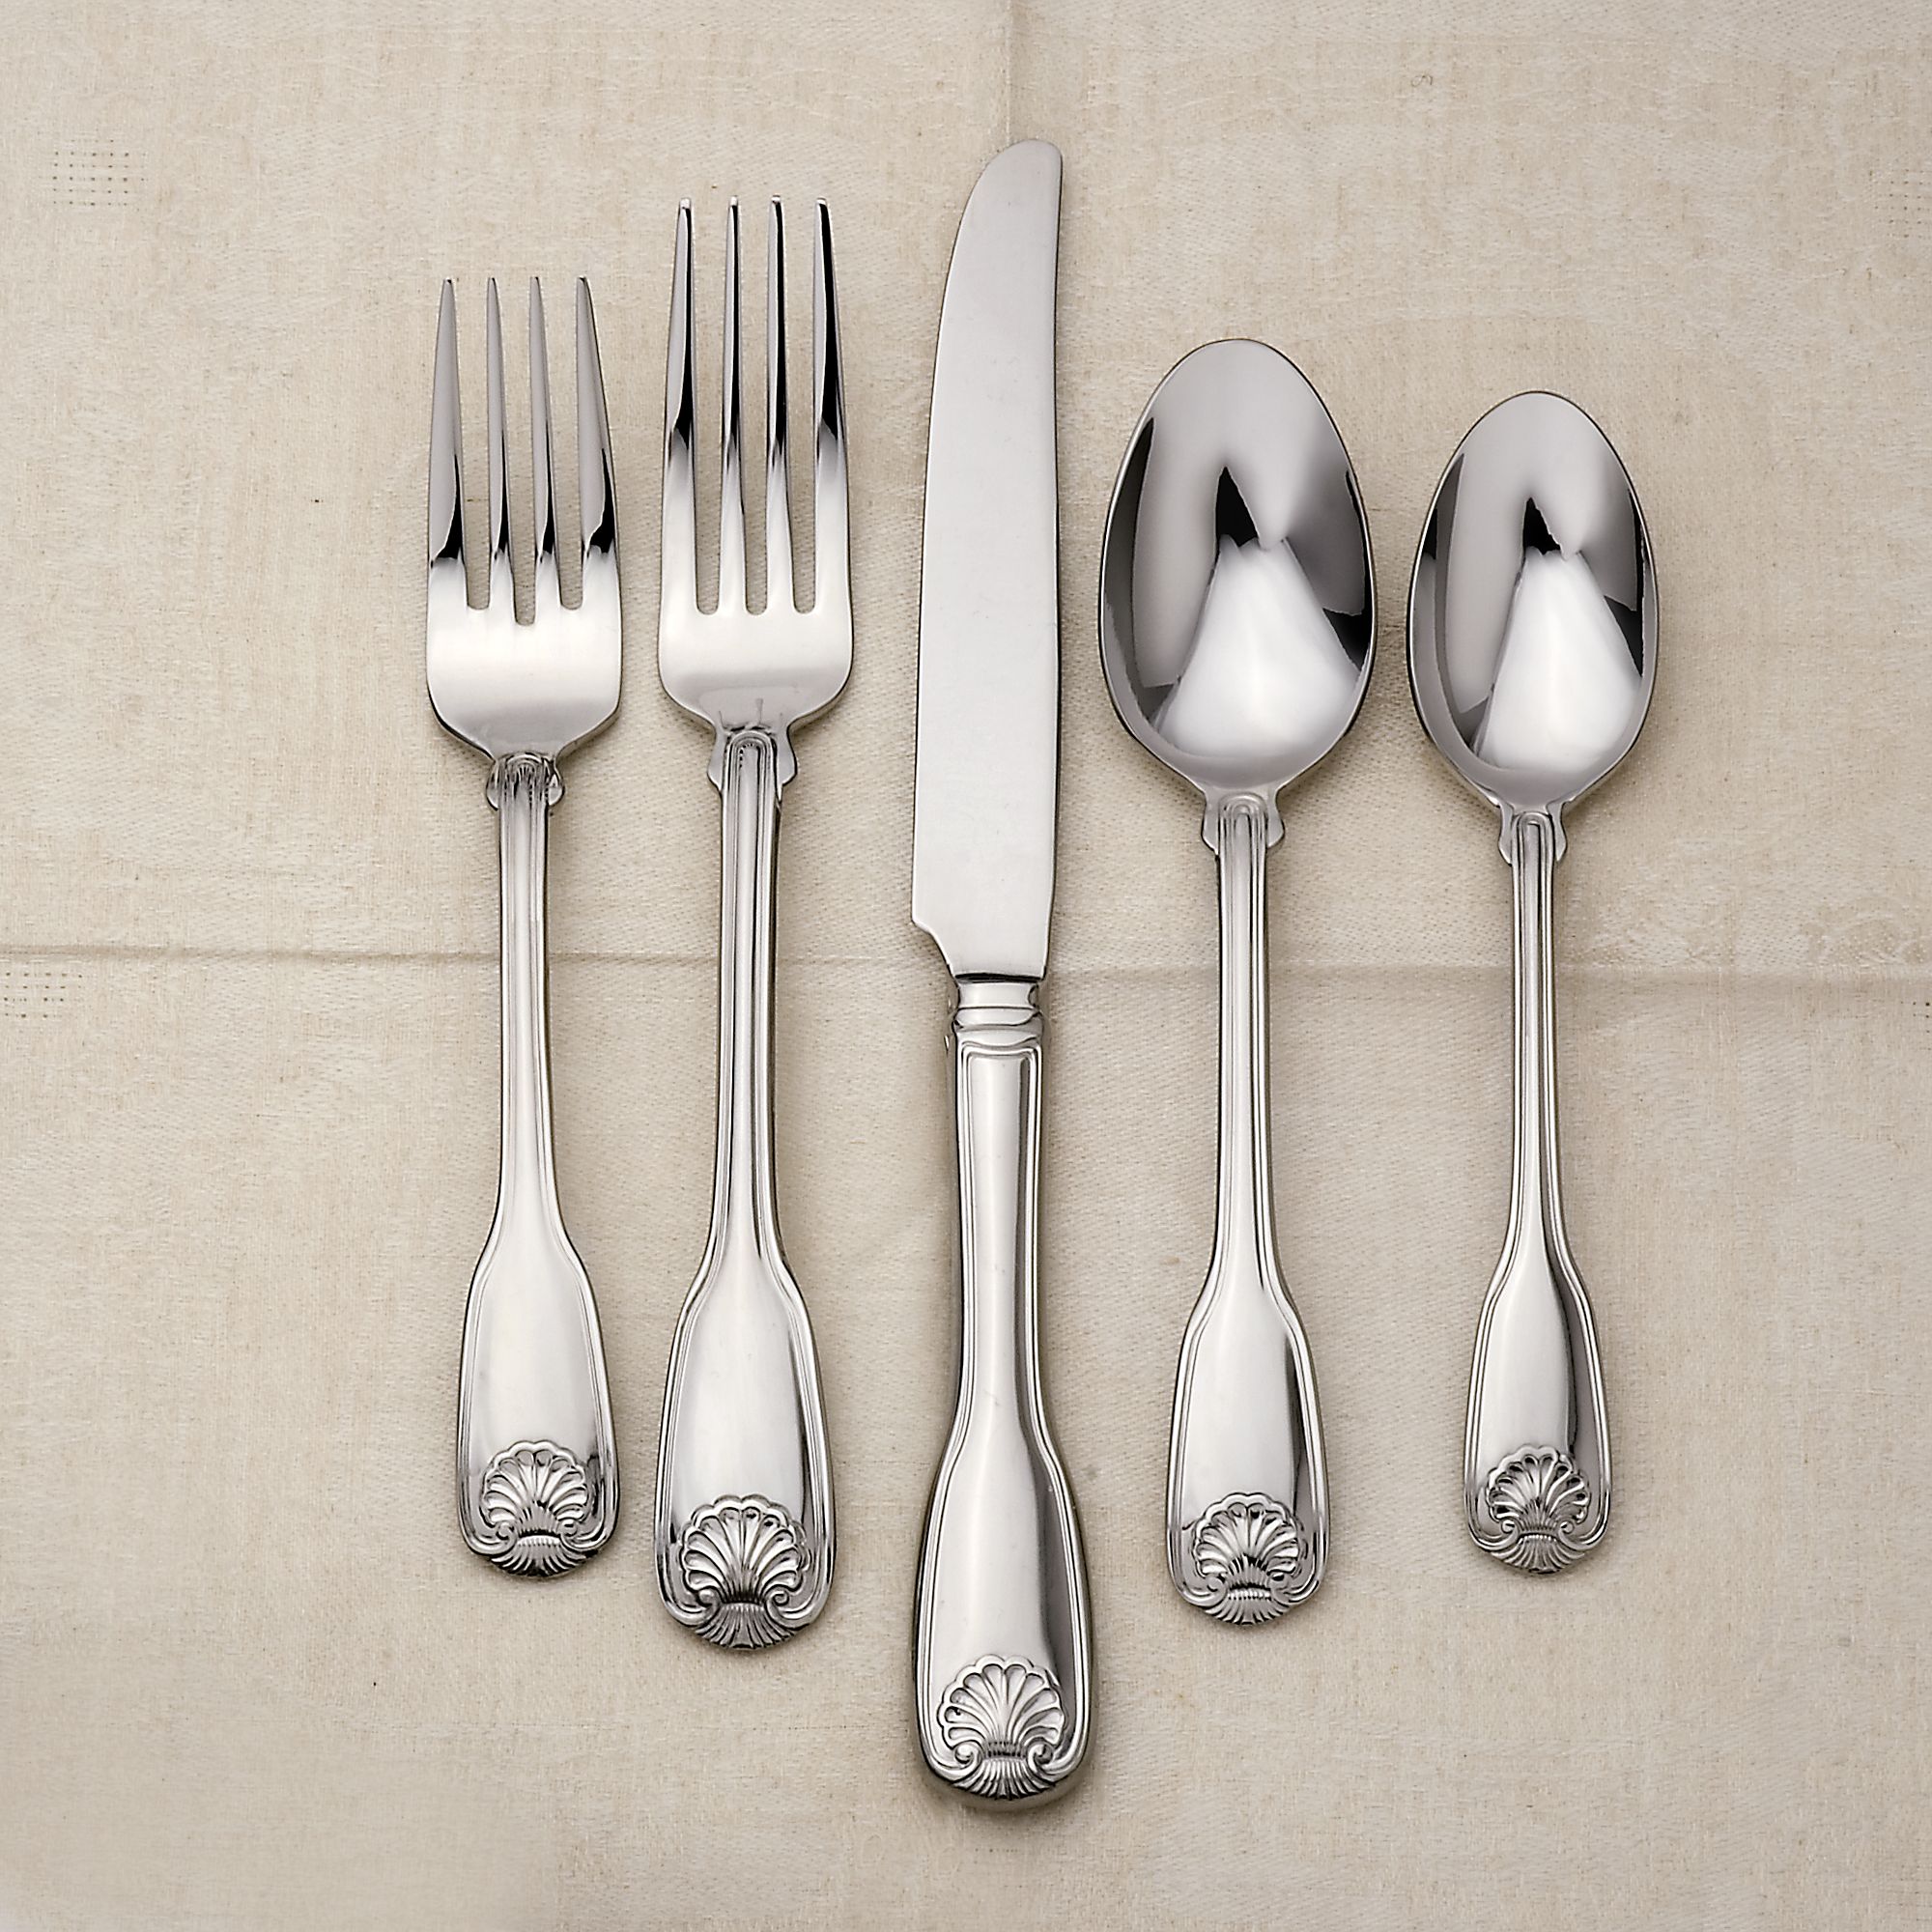 Reed & Barton "Colonial Shell II" 18/10 Stainless Steel Flatware |  Ross-Simons